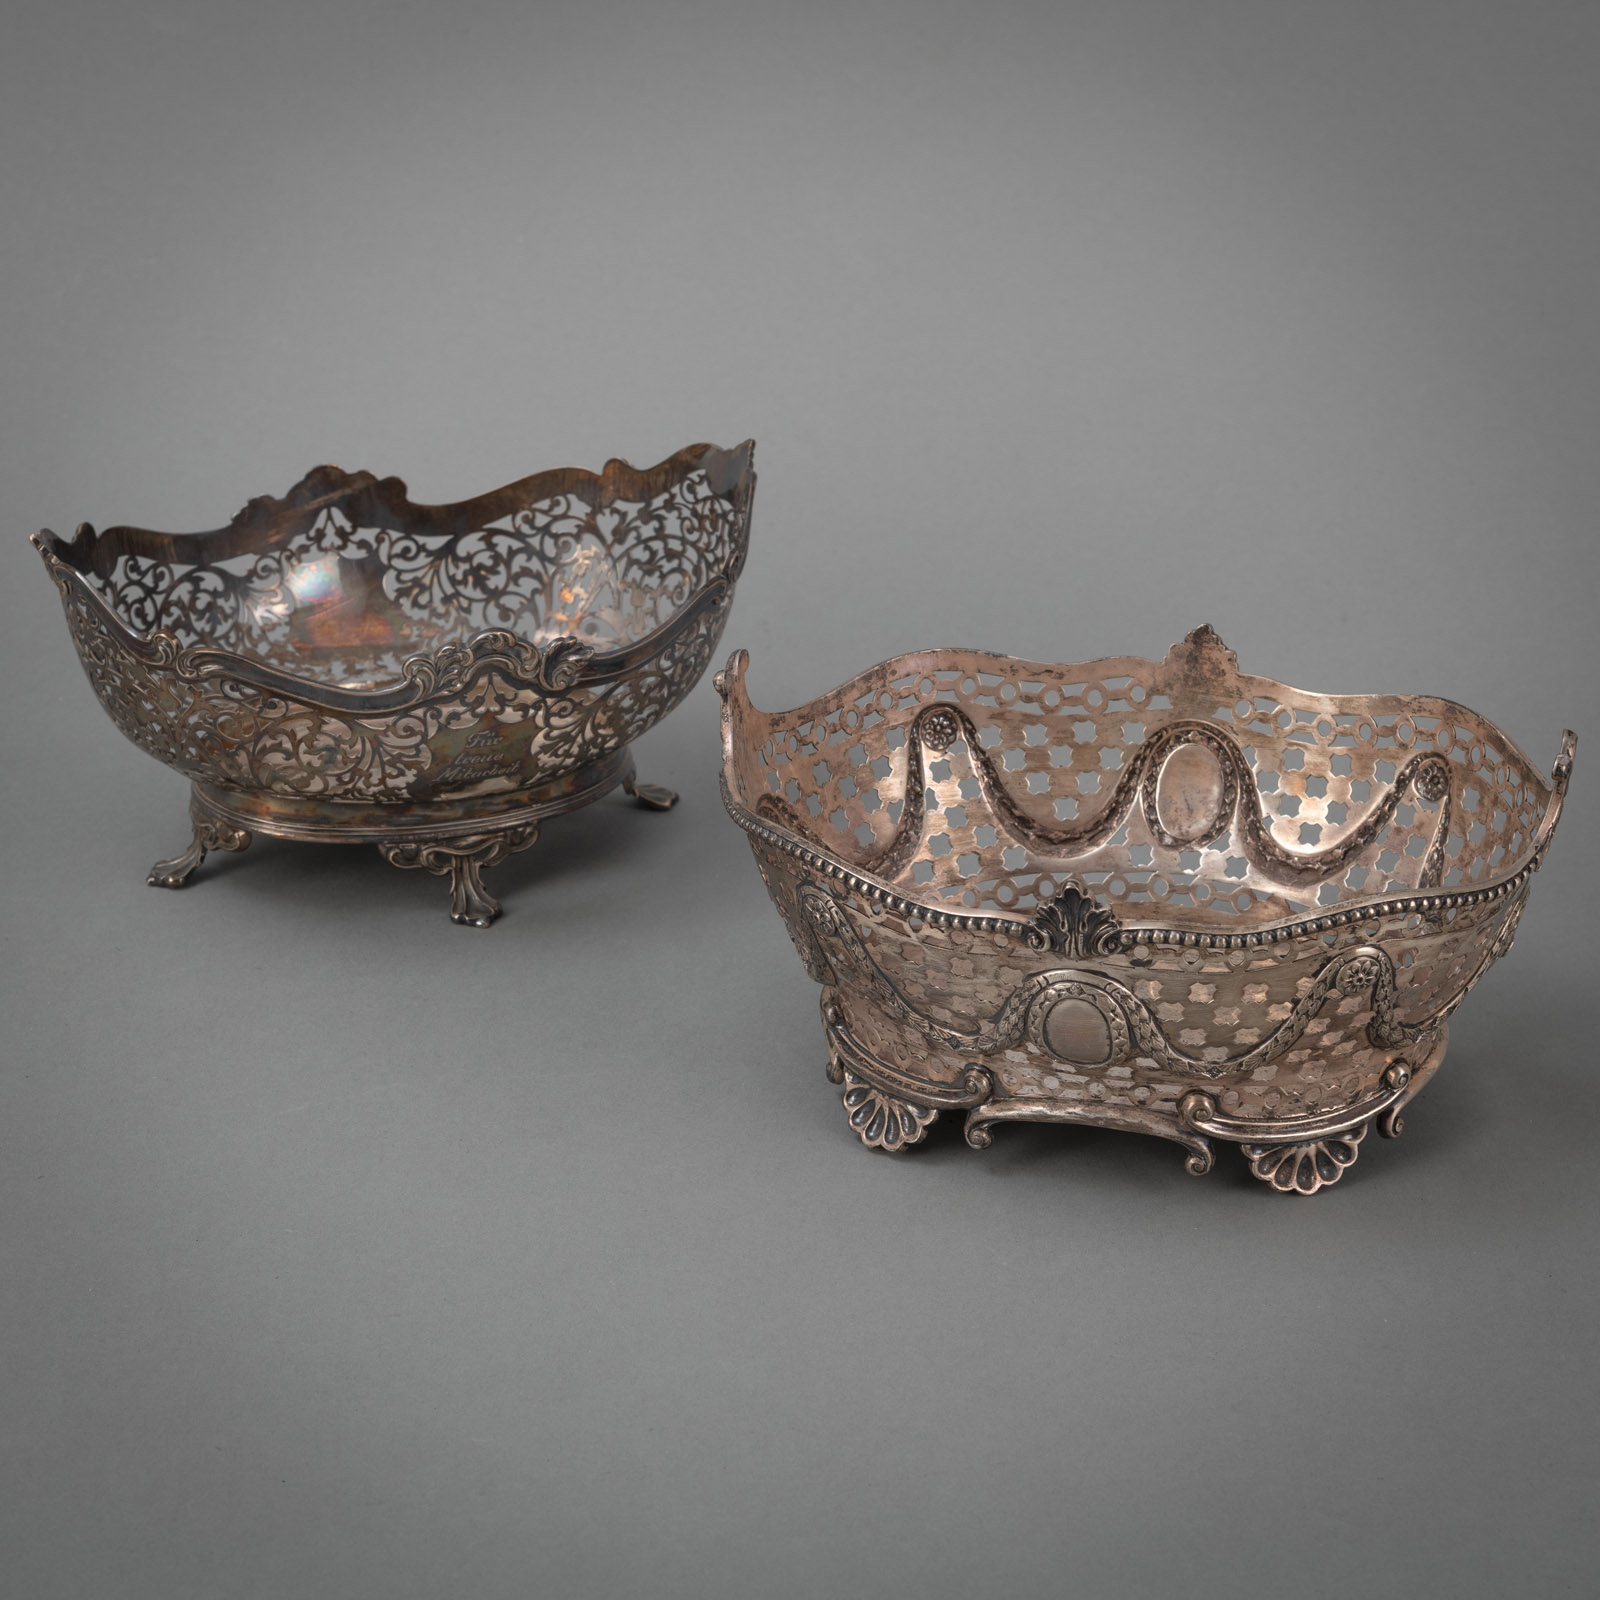 TWO ENGLISH OPENWORK SILVER BASKETS